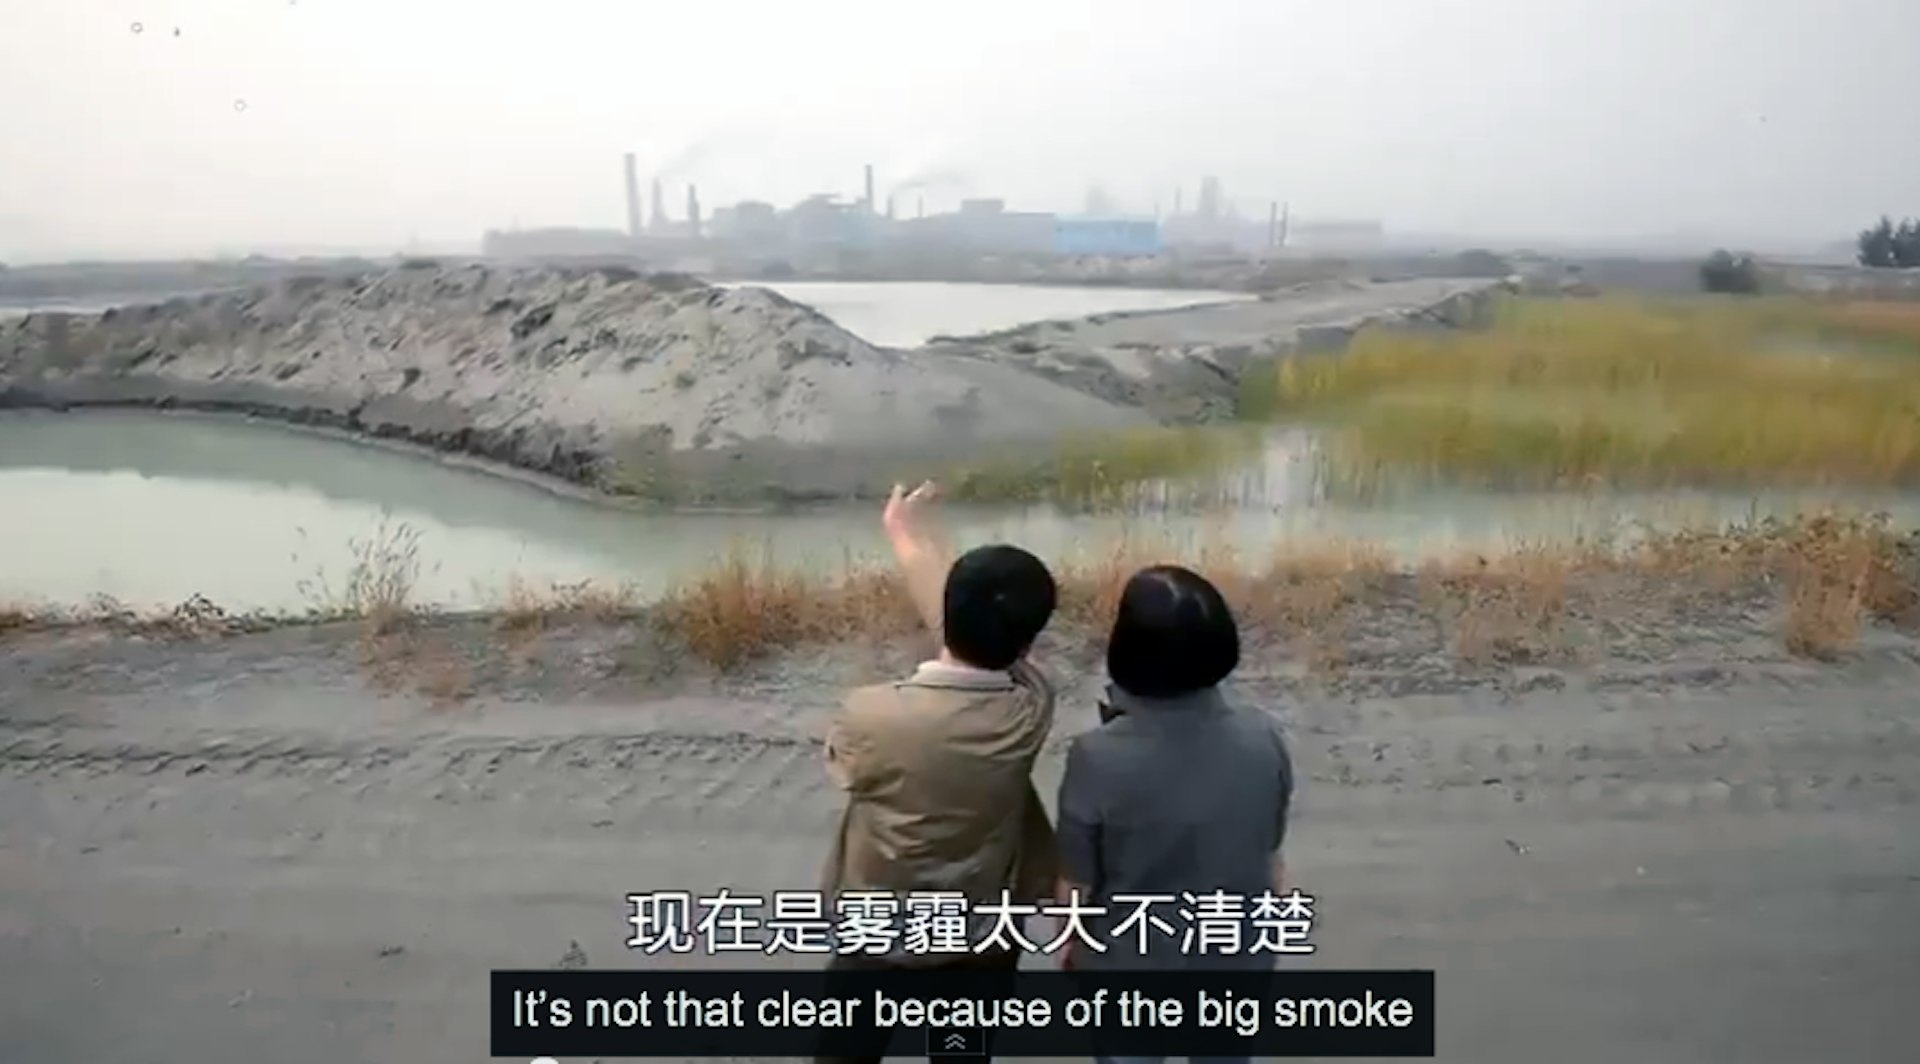 A mother’s crusade against pollution has become a viral hit in China